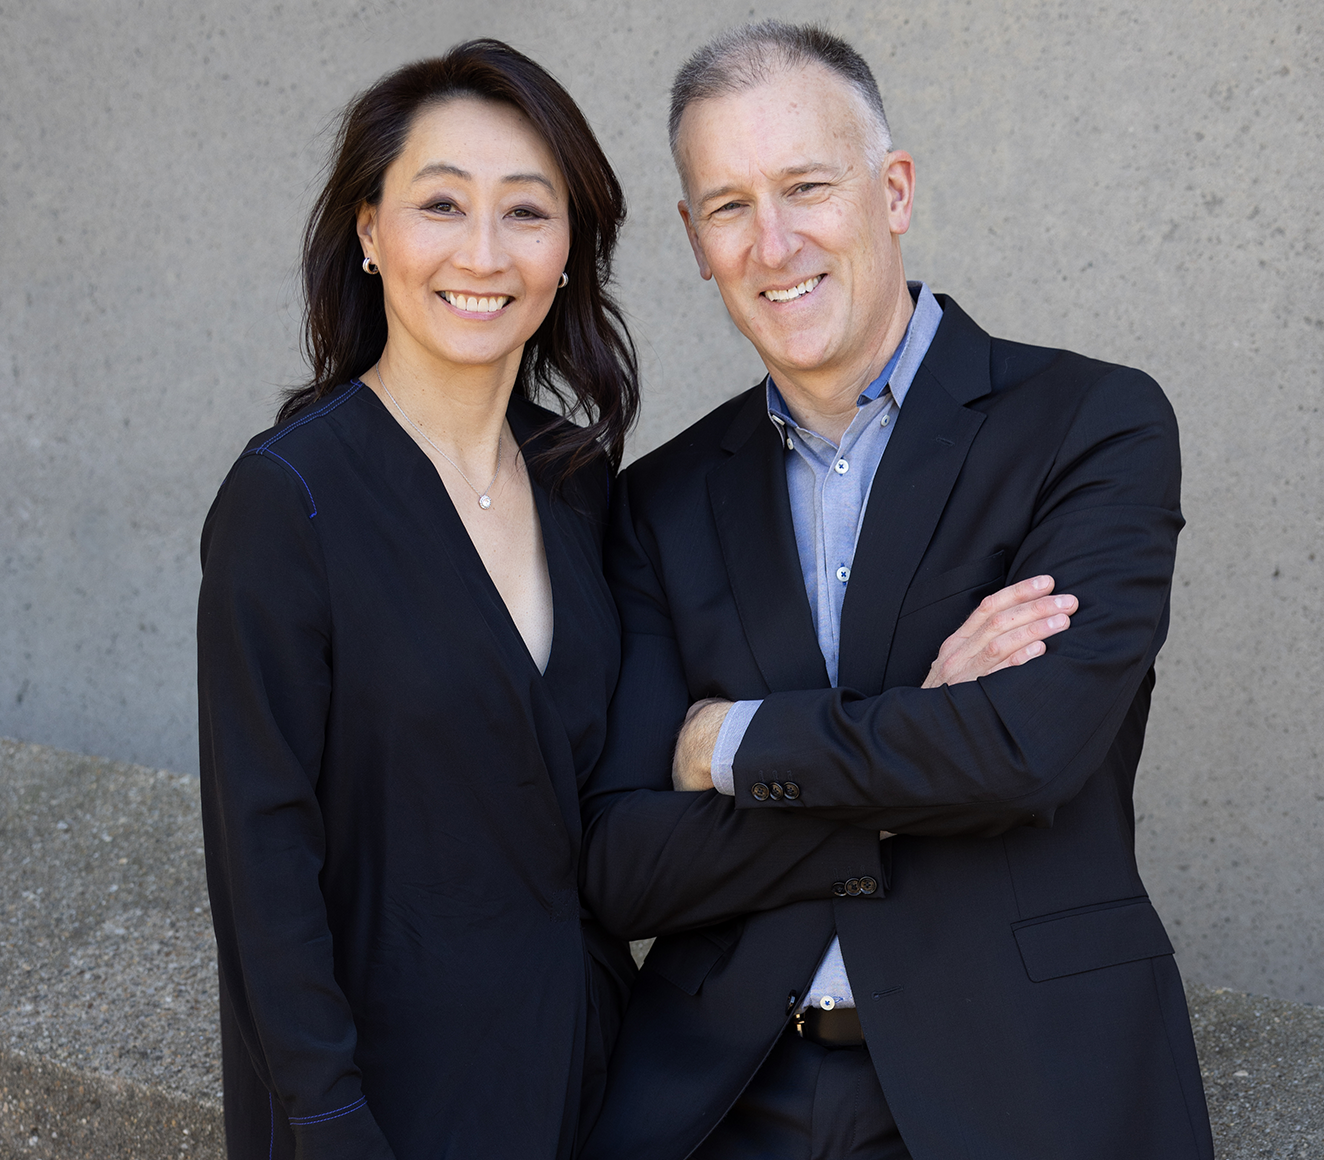 Faculty Directors Grace La & James Dallman smiling and posing together.